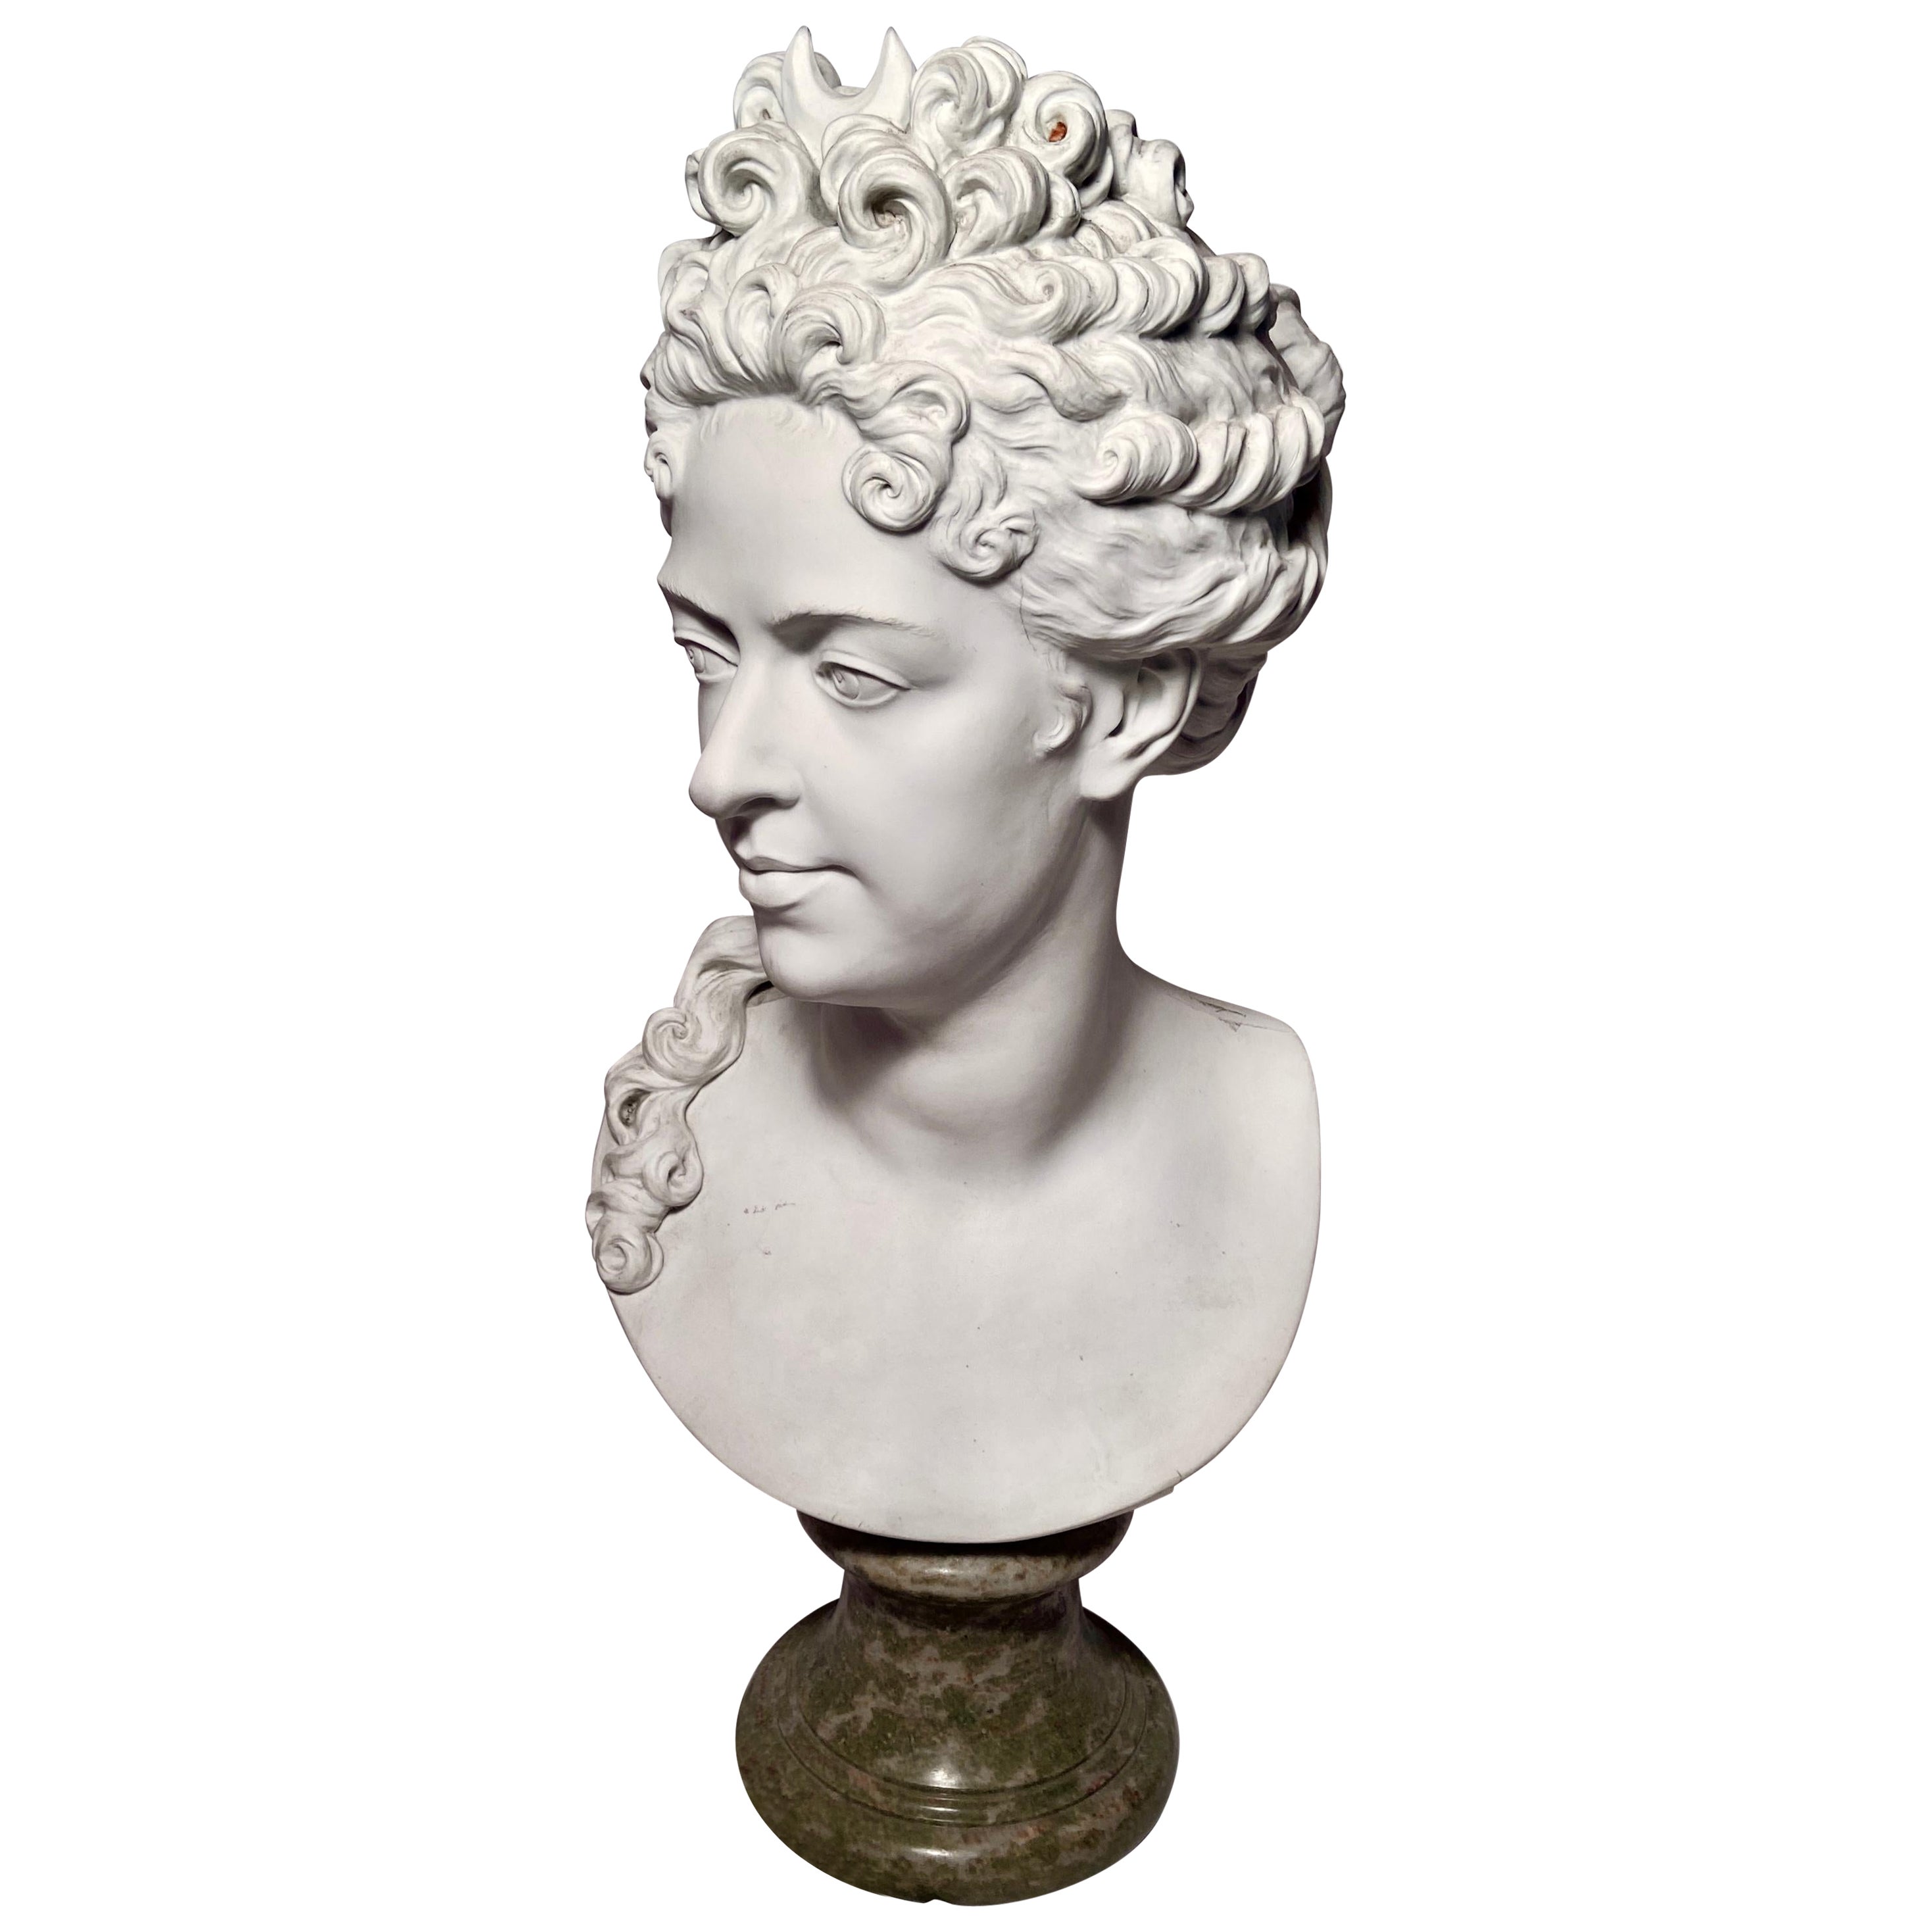 Antique 19th Century French Bisque Porcelain Bust of Diana, Goddess of the Hunt For Sale